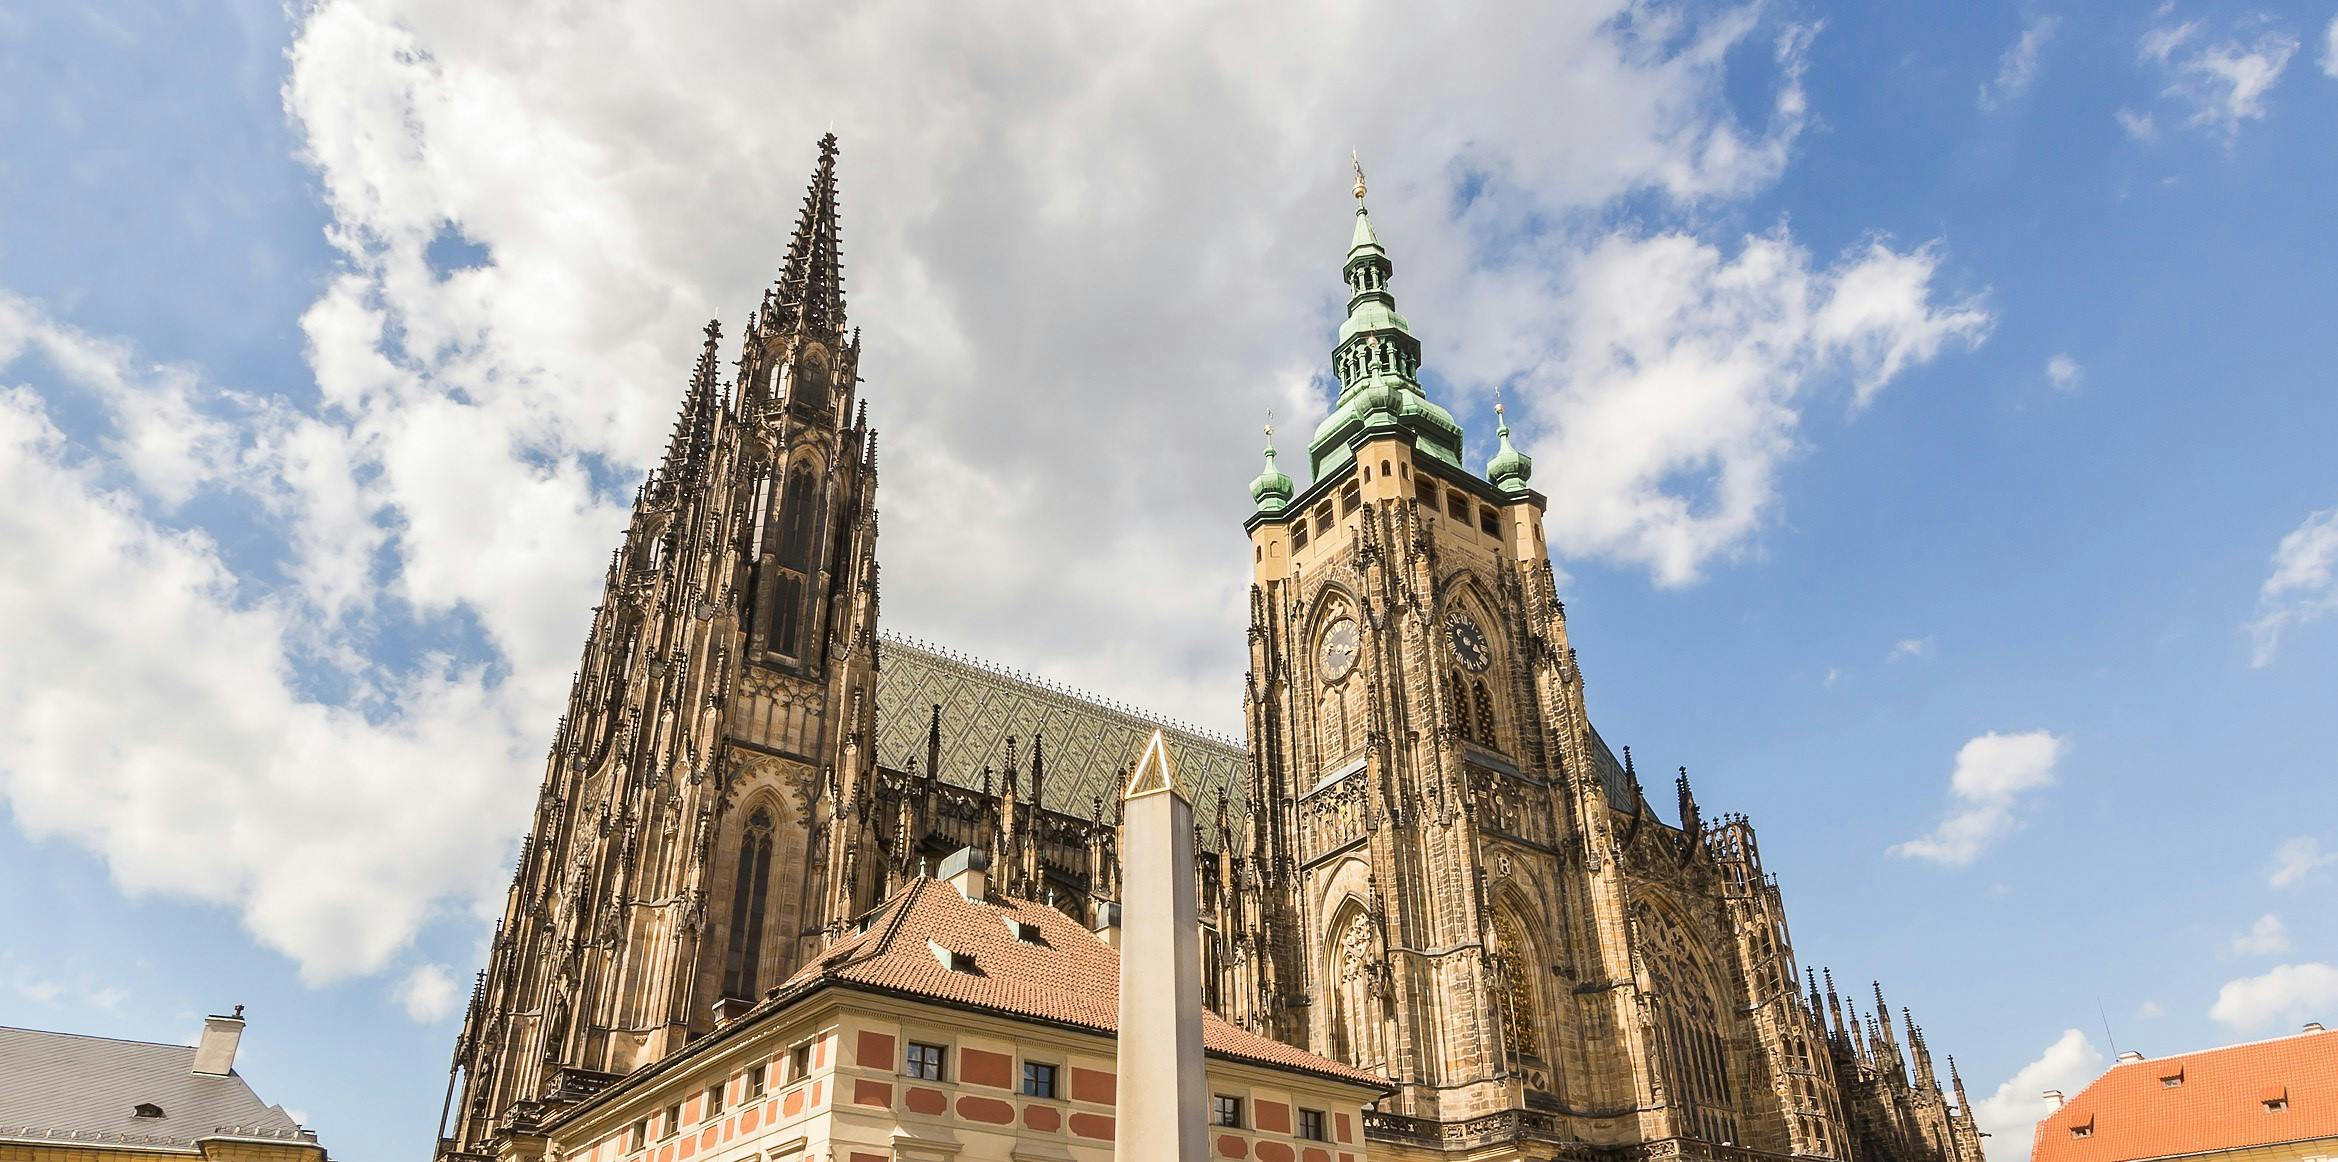 Prague Castle Skip-the-line ticket and private audio tour by mobile app Musement